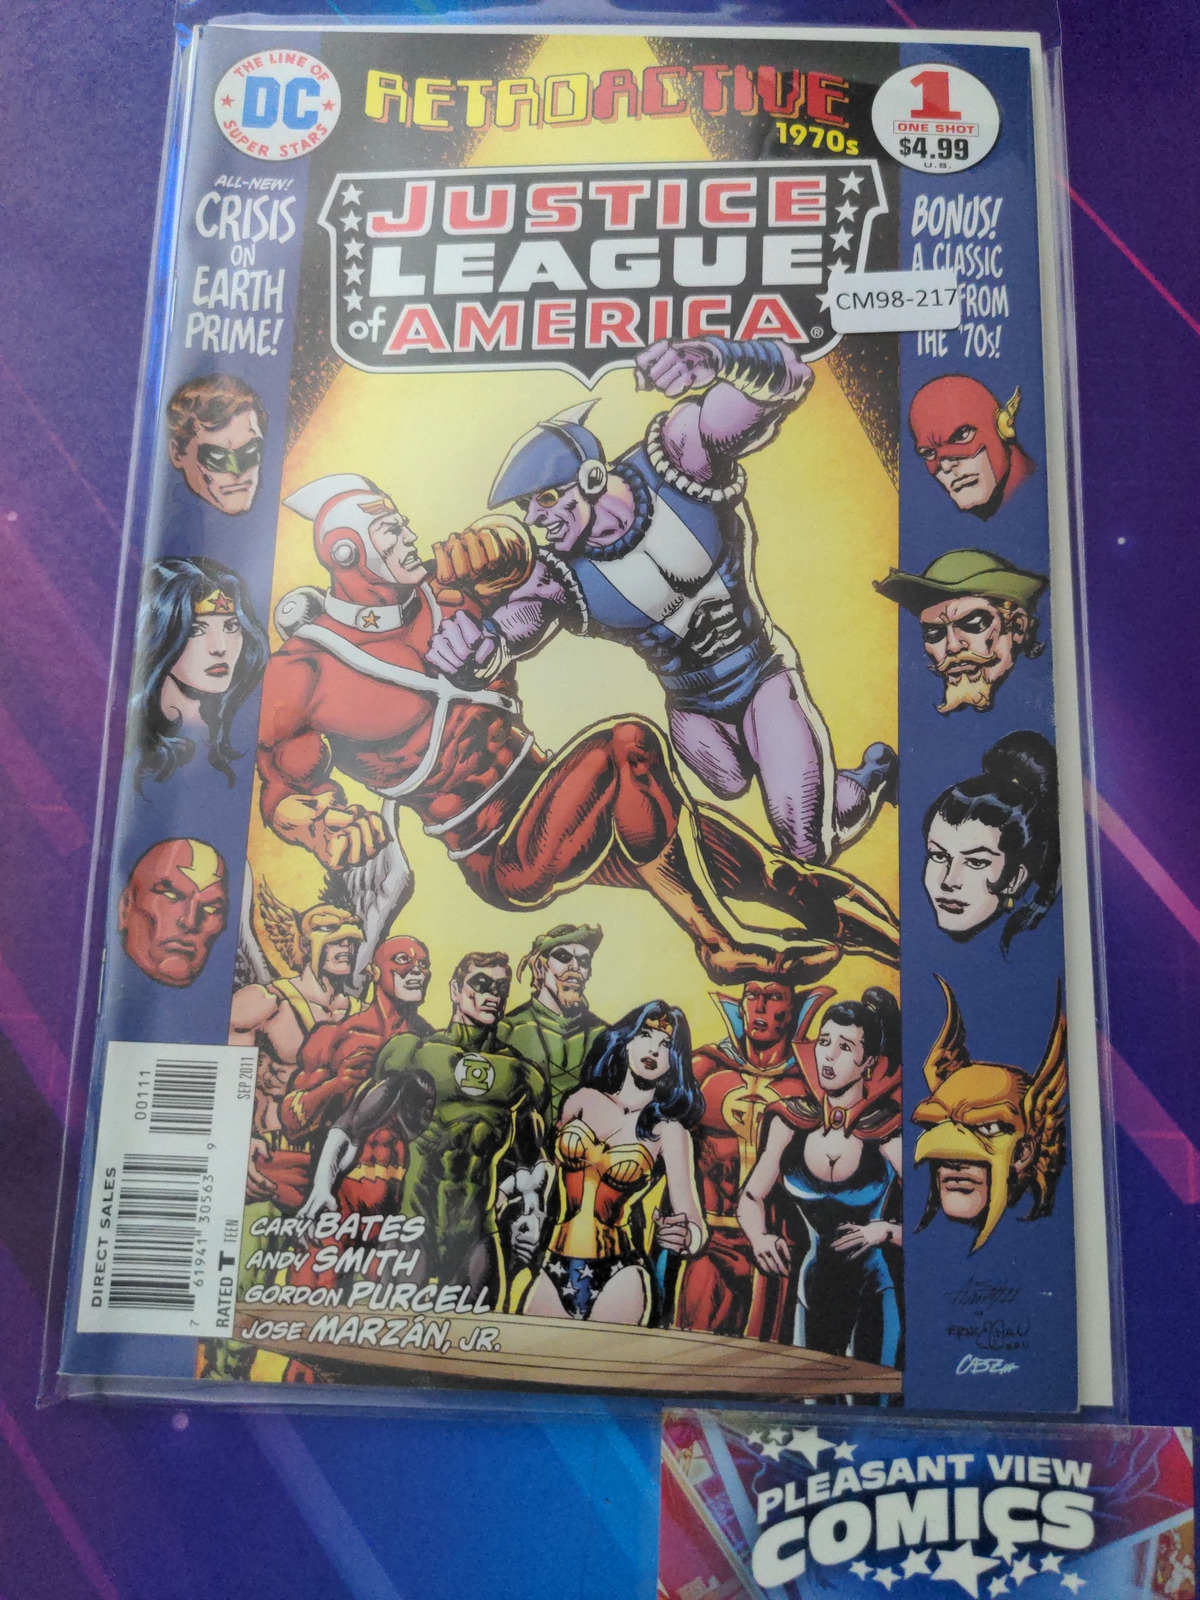 DC RETROACTIVE 1970S: JUSTICE LEAGUE OF AMERICA #1 ONE-SHOT 8.0 DC CM98-217